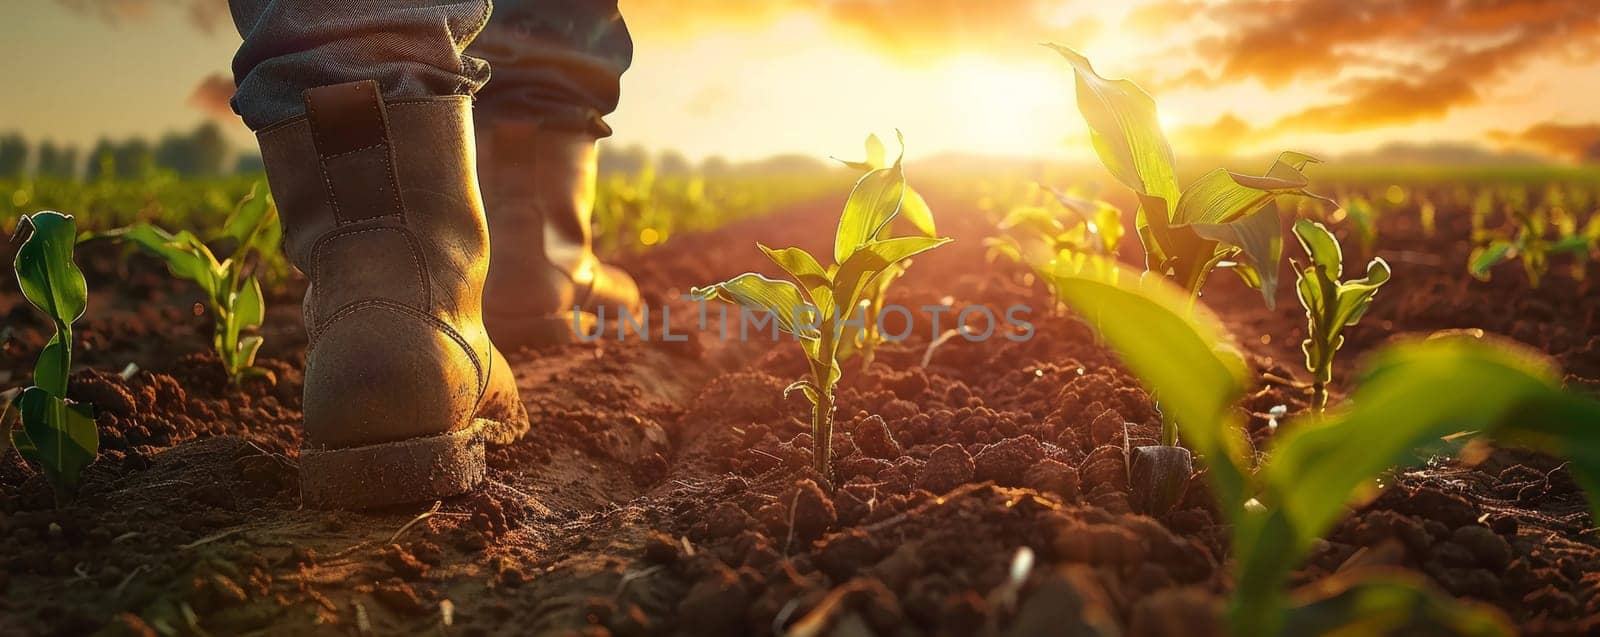 Farmer walking through young cornfield at sunset, close-up on boots and seedlings. Agriculture and rural lifestyle concept.